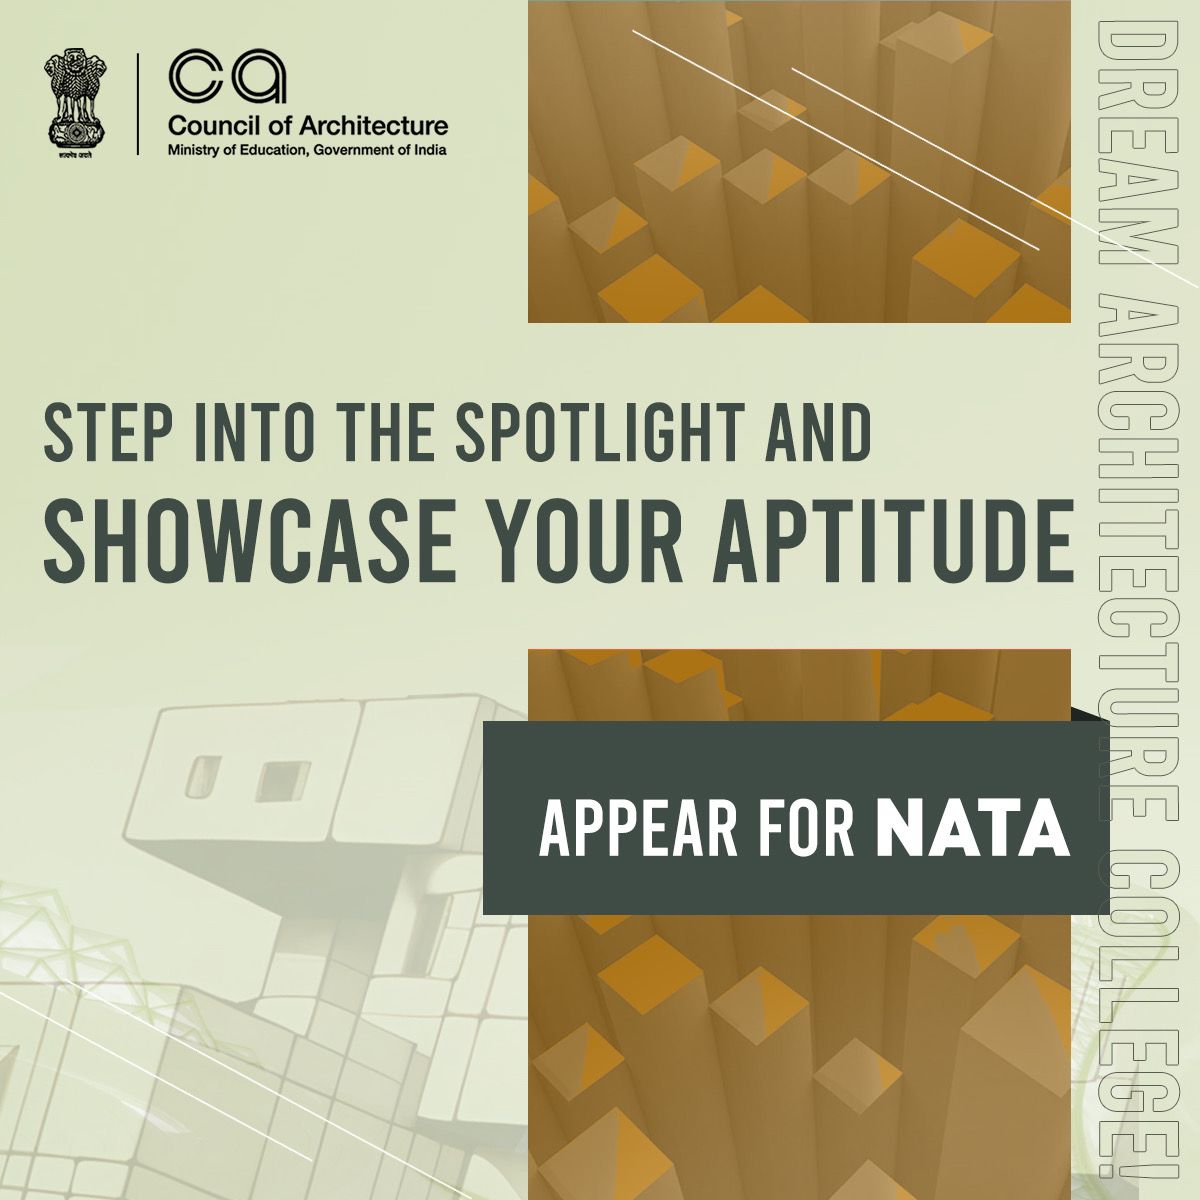 Take the first step towards your dream career!
Appear for NATA 2024 today!

#NATA #NATA2024 #examday #aspiringarchitects #dreamcareer #architecture #councilofarchitecture